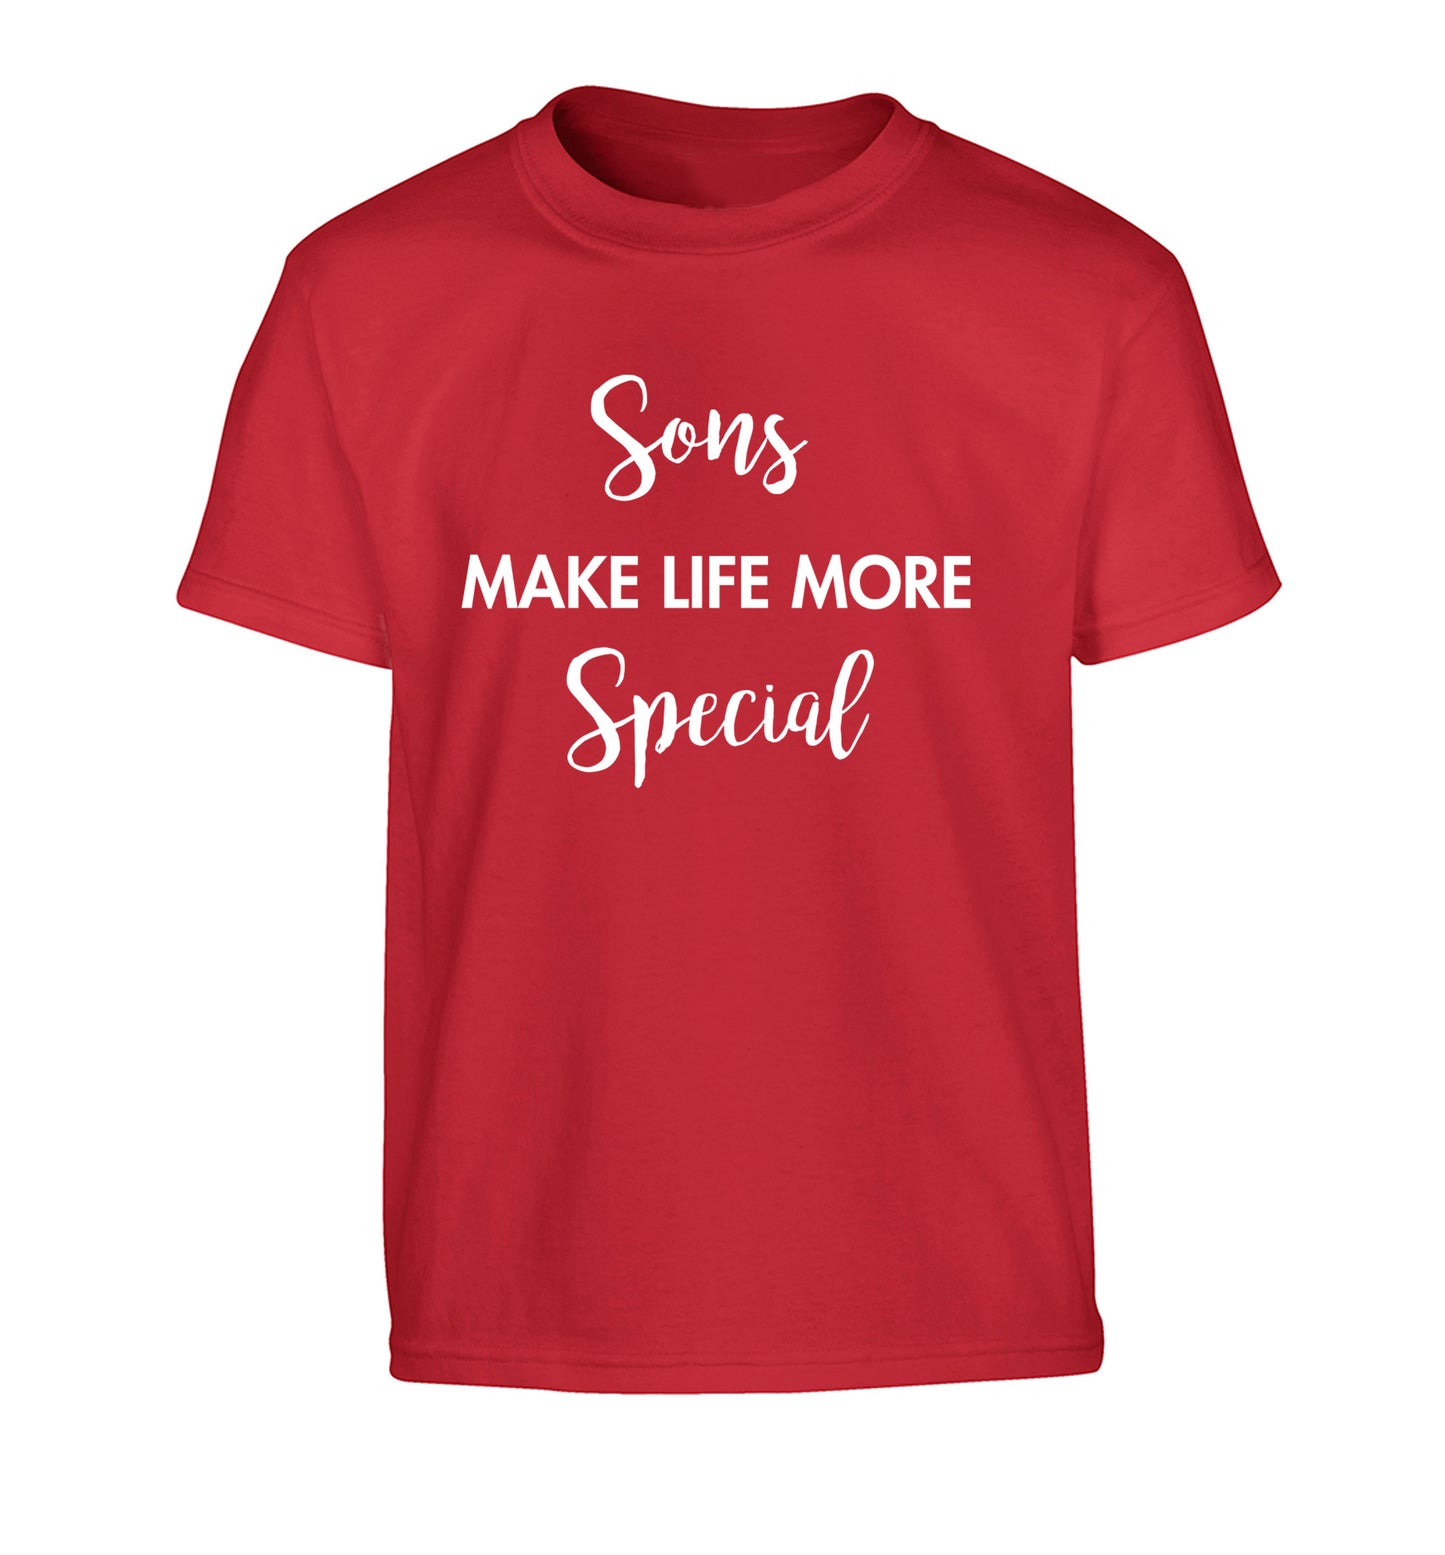 Sons make life more special Children's red Tshirt 12-14 Years